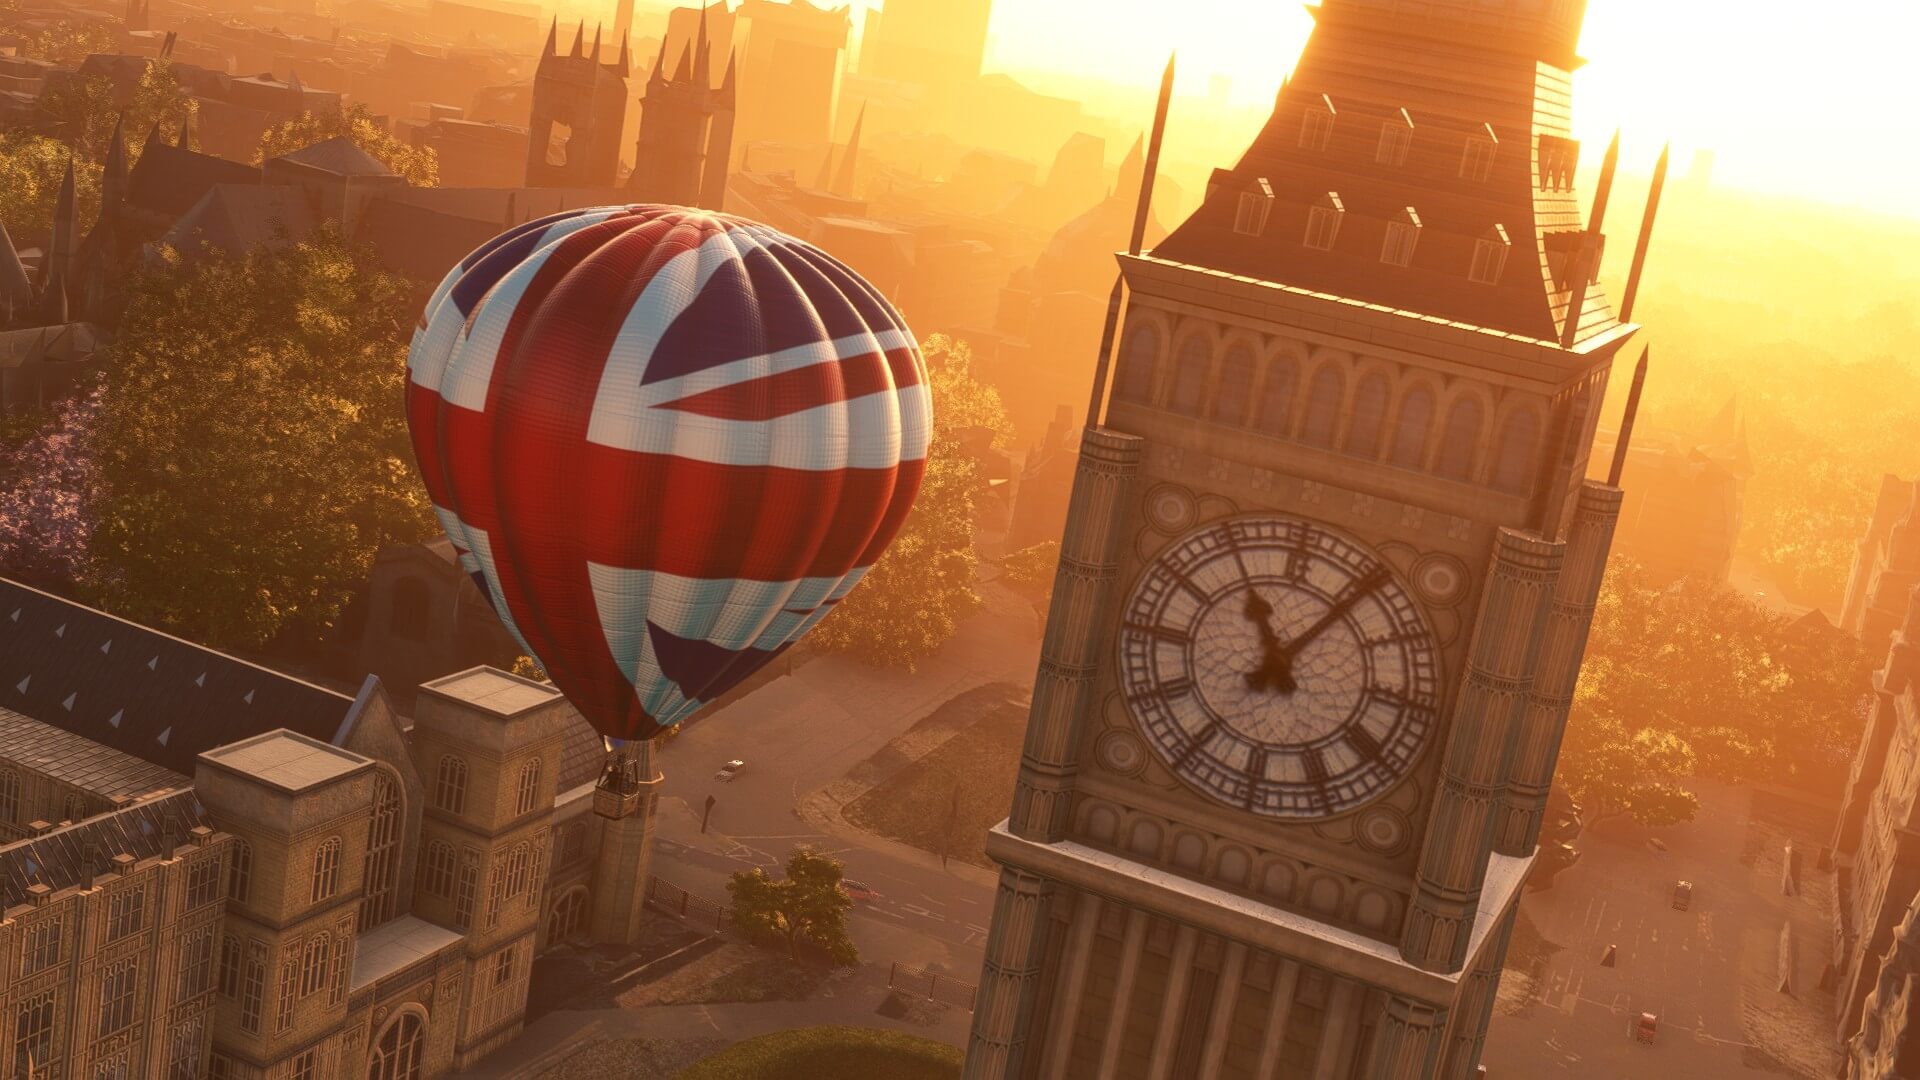 A Hot Air Balloon with Union Flag paint scheme flies close to the Clock Tower in London, England.